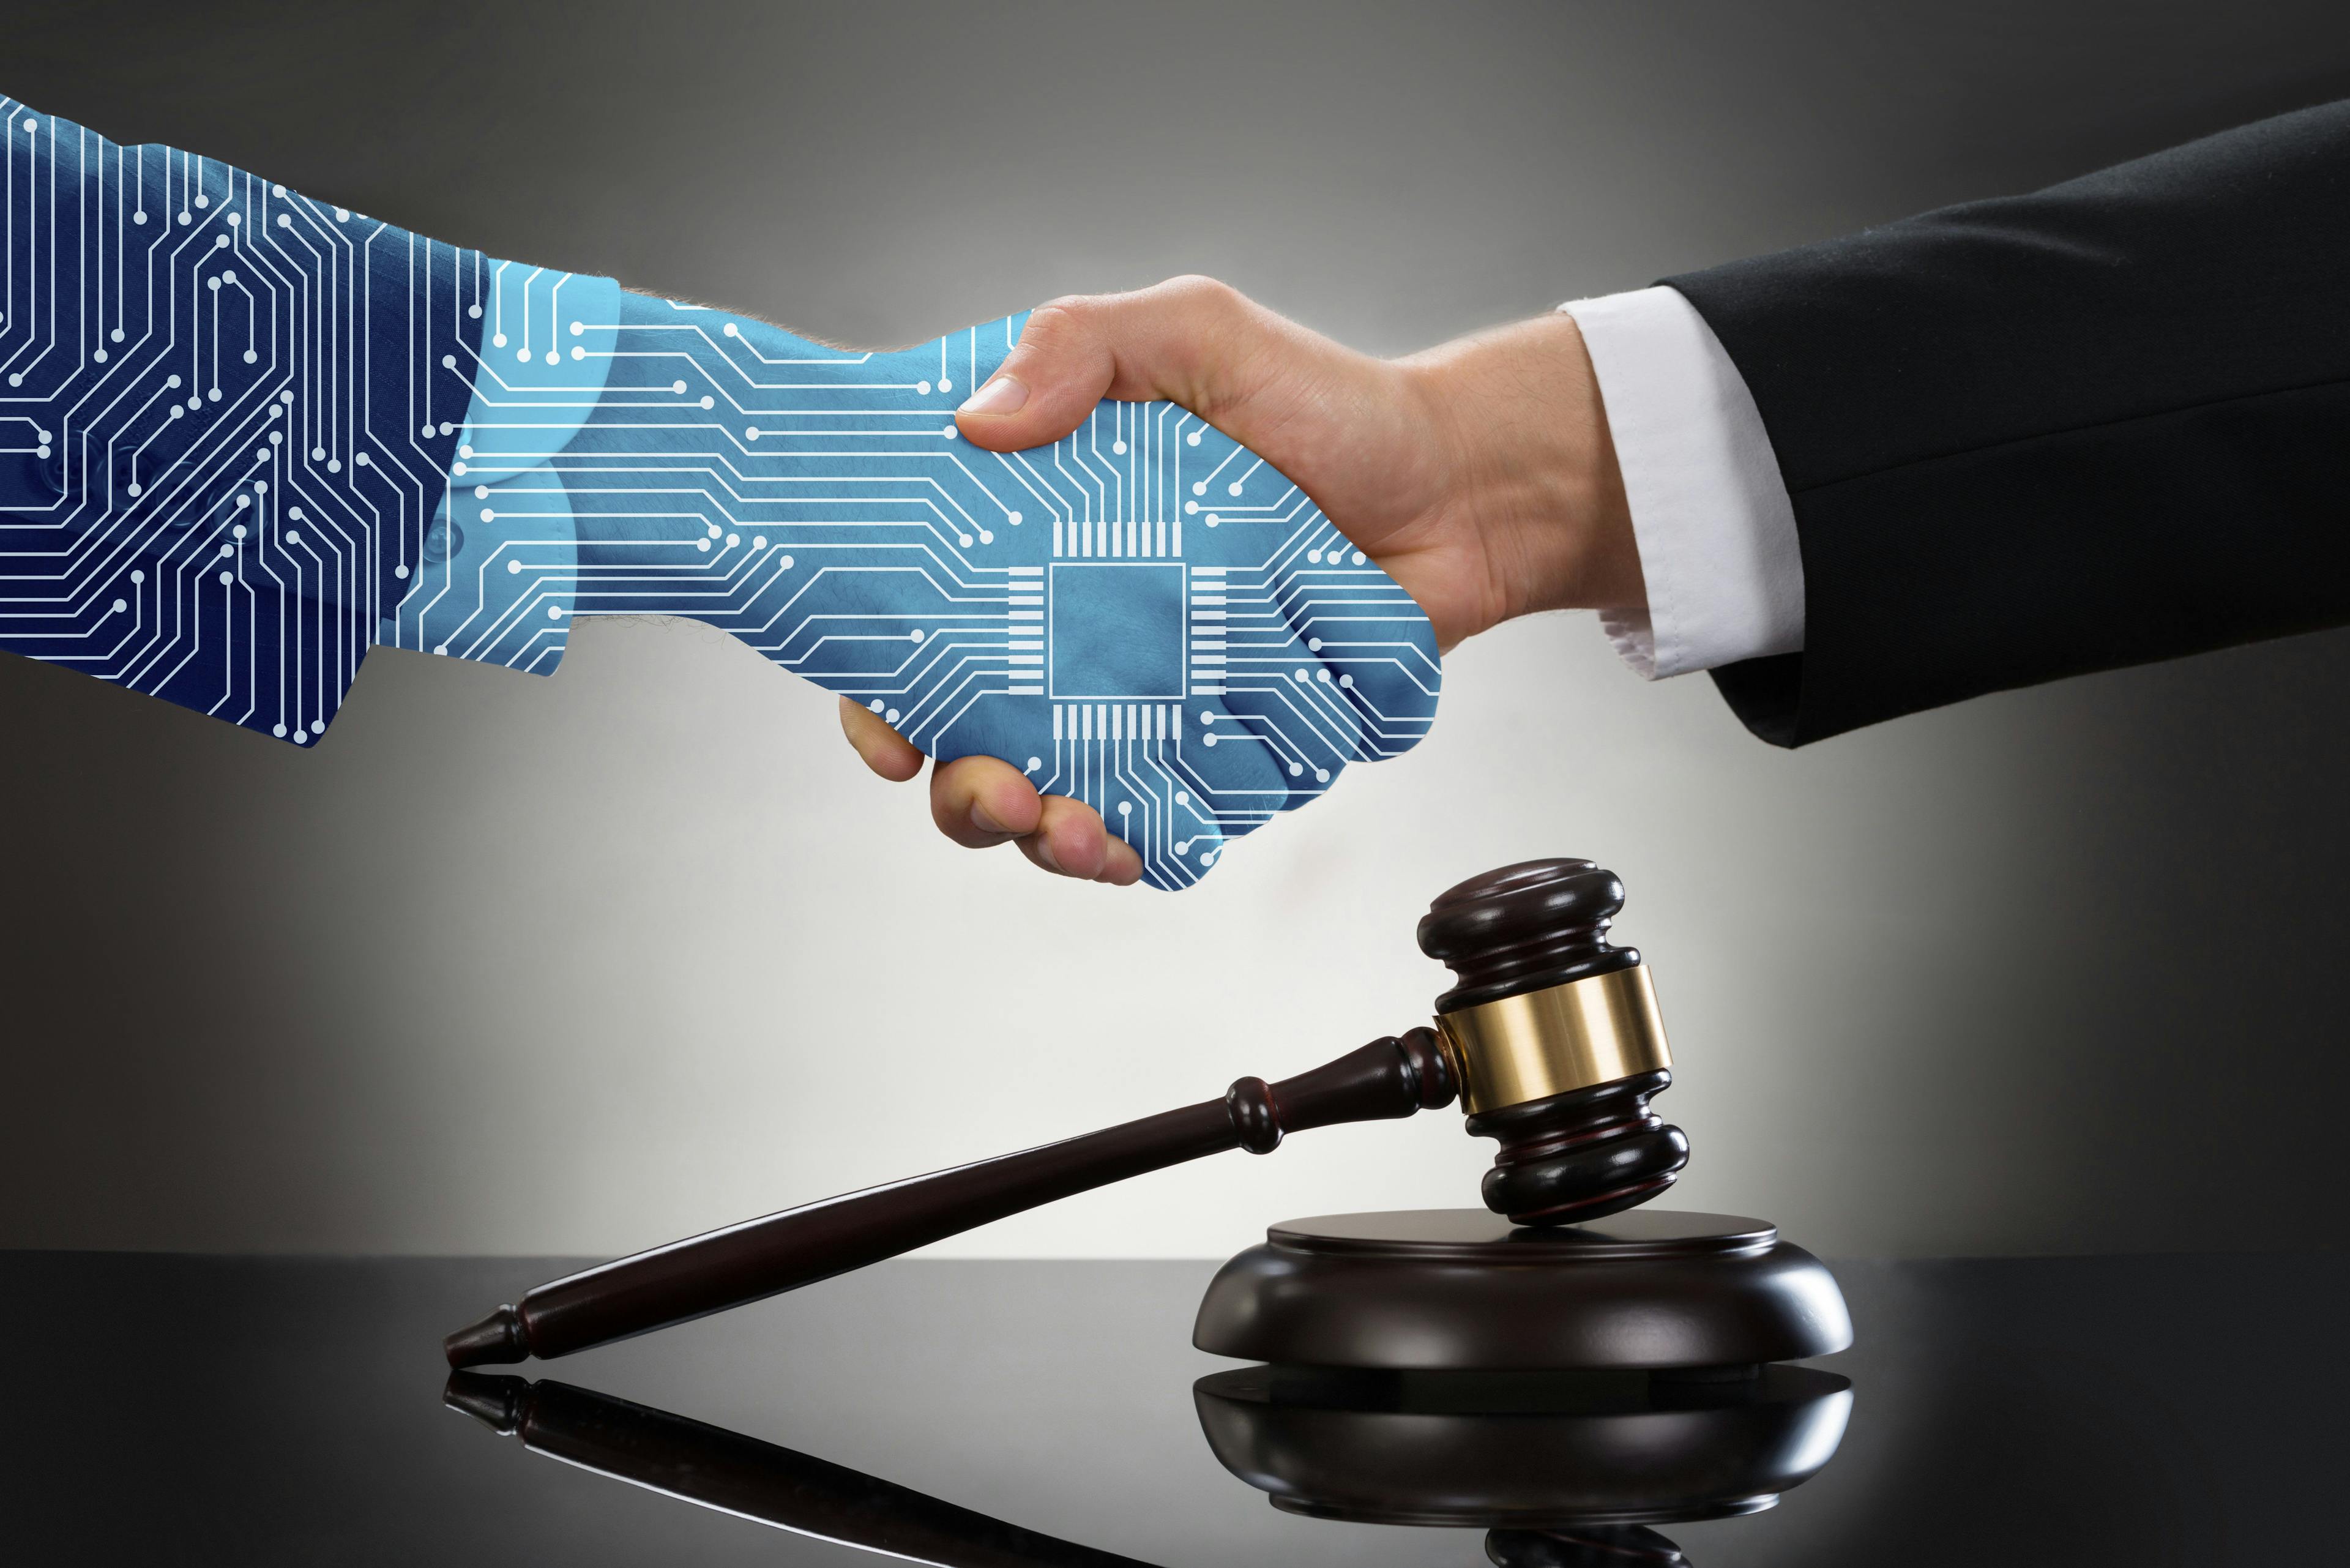 Report: AI can help avoid malpractice lawsuits, but risks may emerge